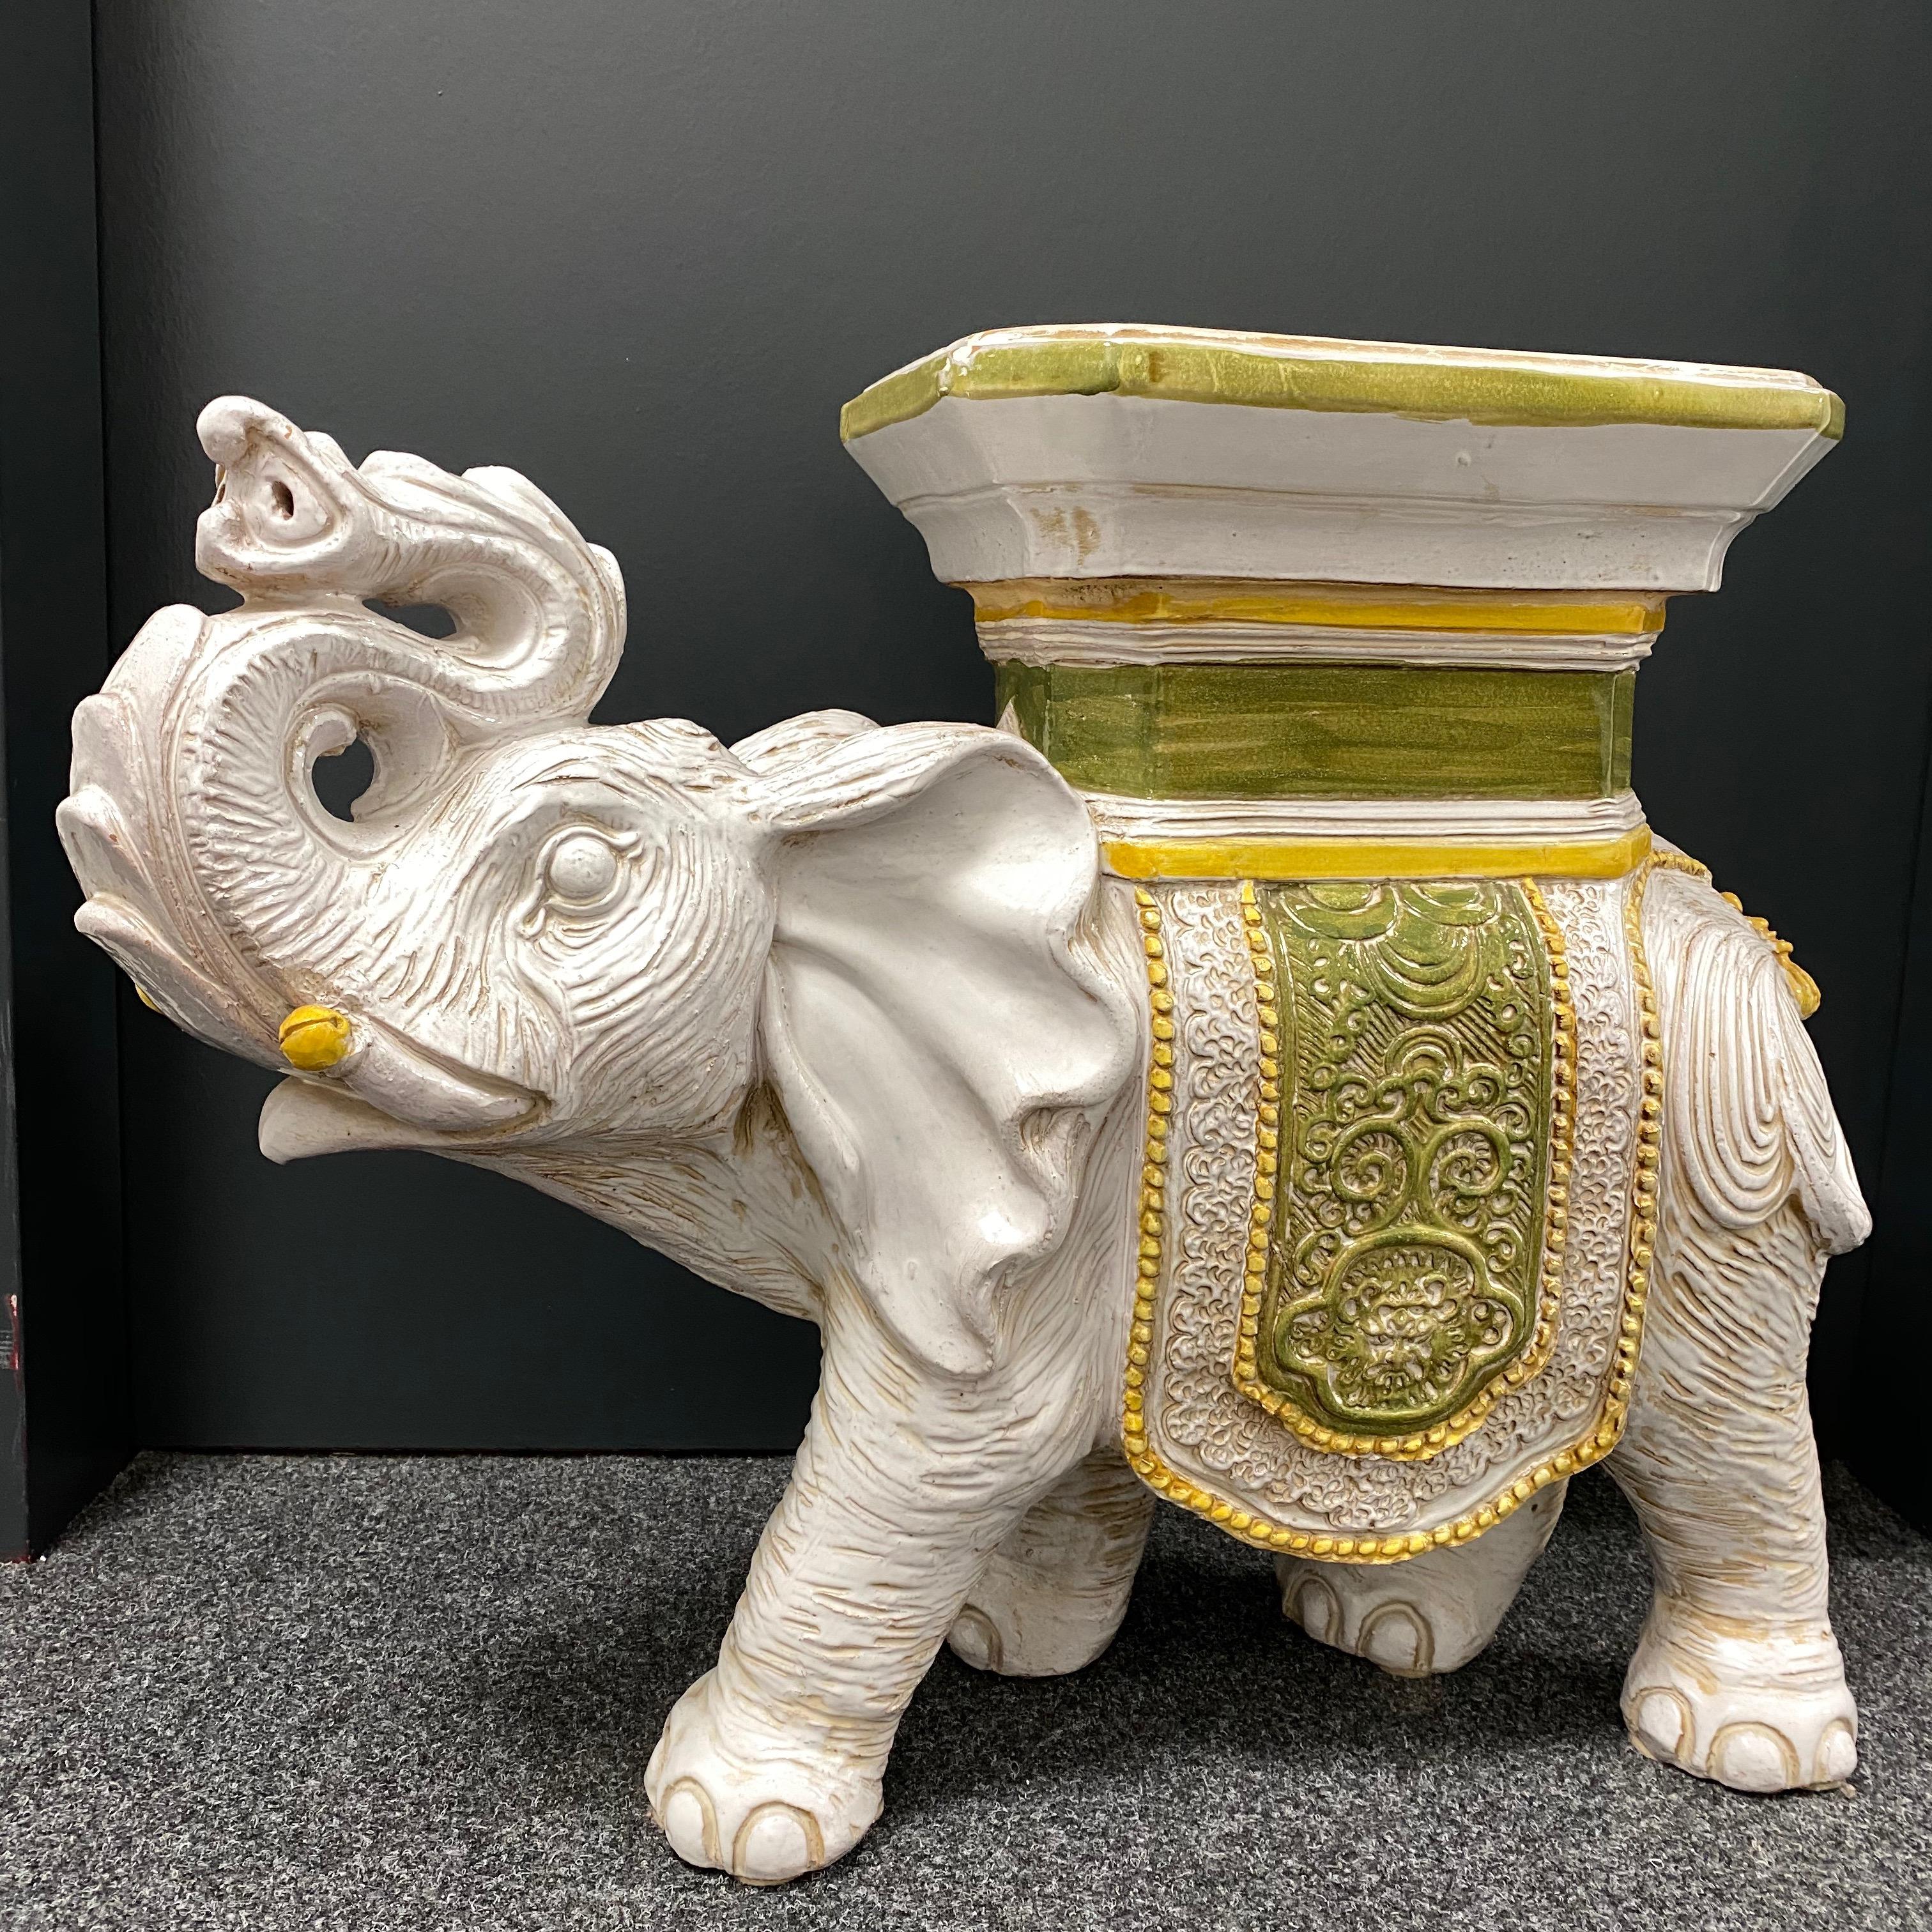 Mid-20th century glazed terracotta garden stool plant stand or seat, flower pot seat or side table. Handmade of terracotta. Vintage garden seat in the shape of an elephant with a pedestal top, all in cream white ceramic with yellow and green